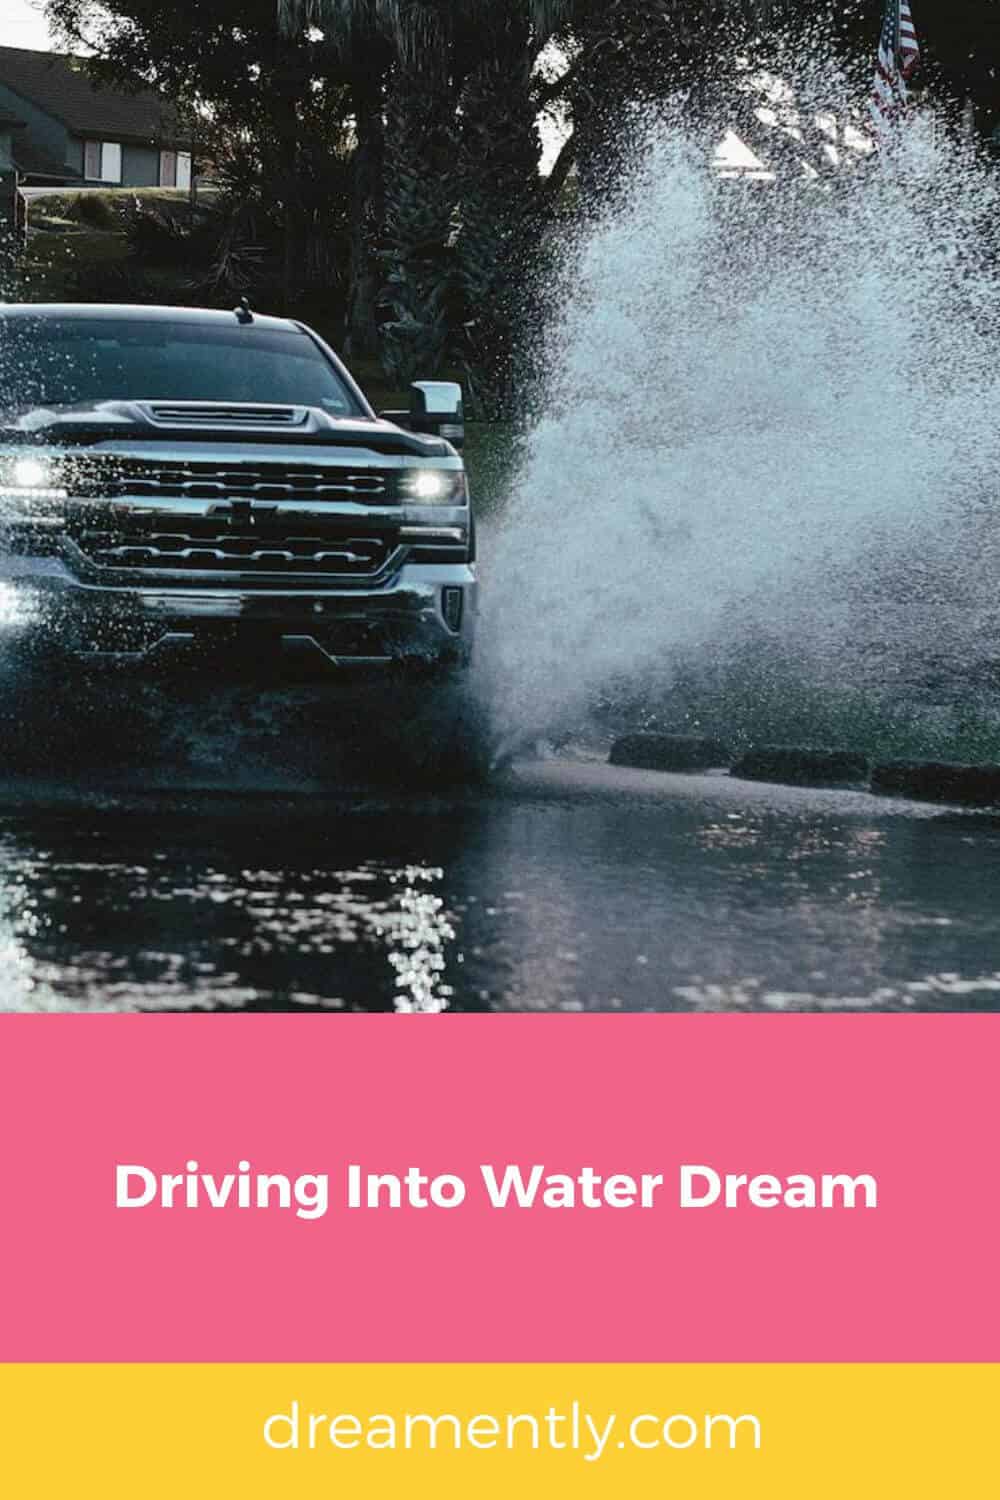 Driving Into Water Dream (2)